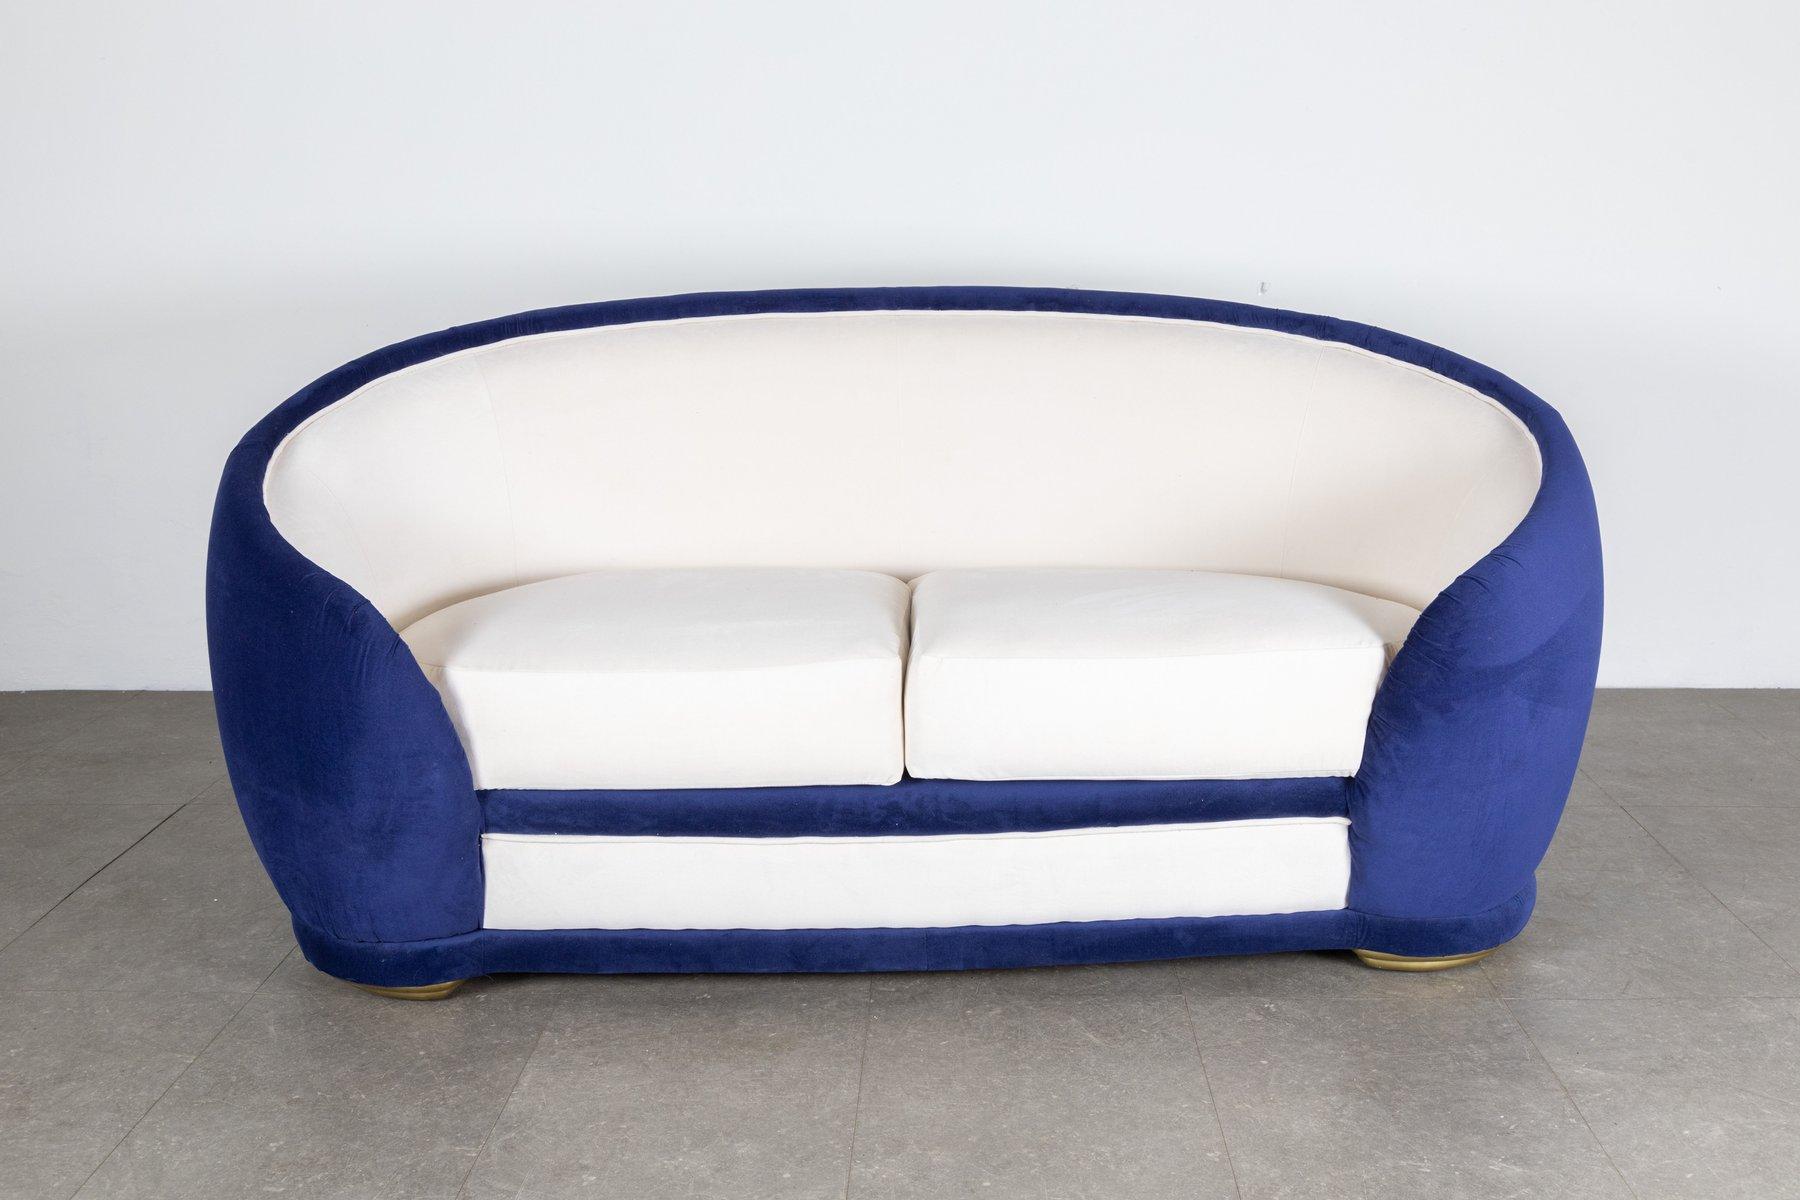 The Italian 1950s were iconic and innovative especially in terms of seating, this small sofa is an example of Italian creative genius.
Among the great masters who designed these models, one certainly remembers Giò Ponti and Cesare Lacca.
This sofa